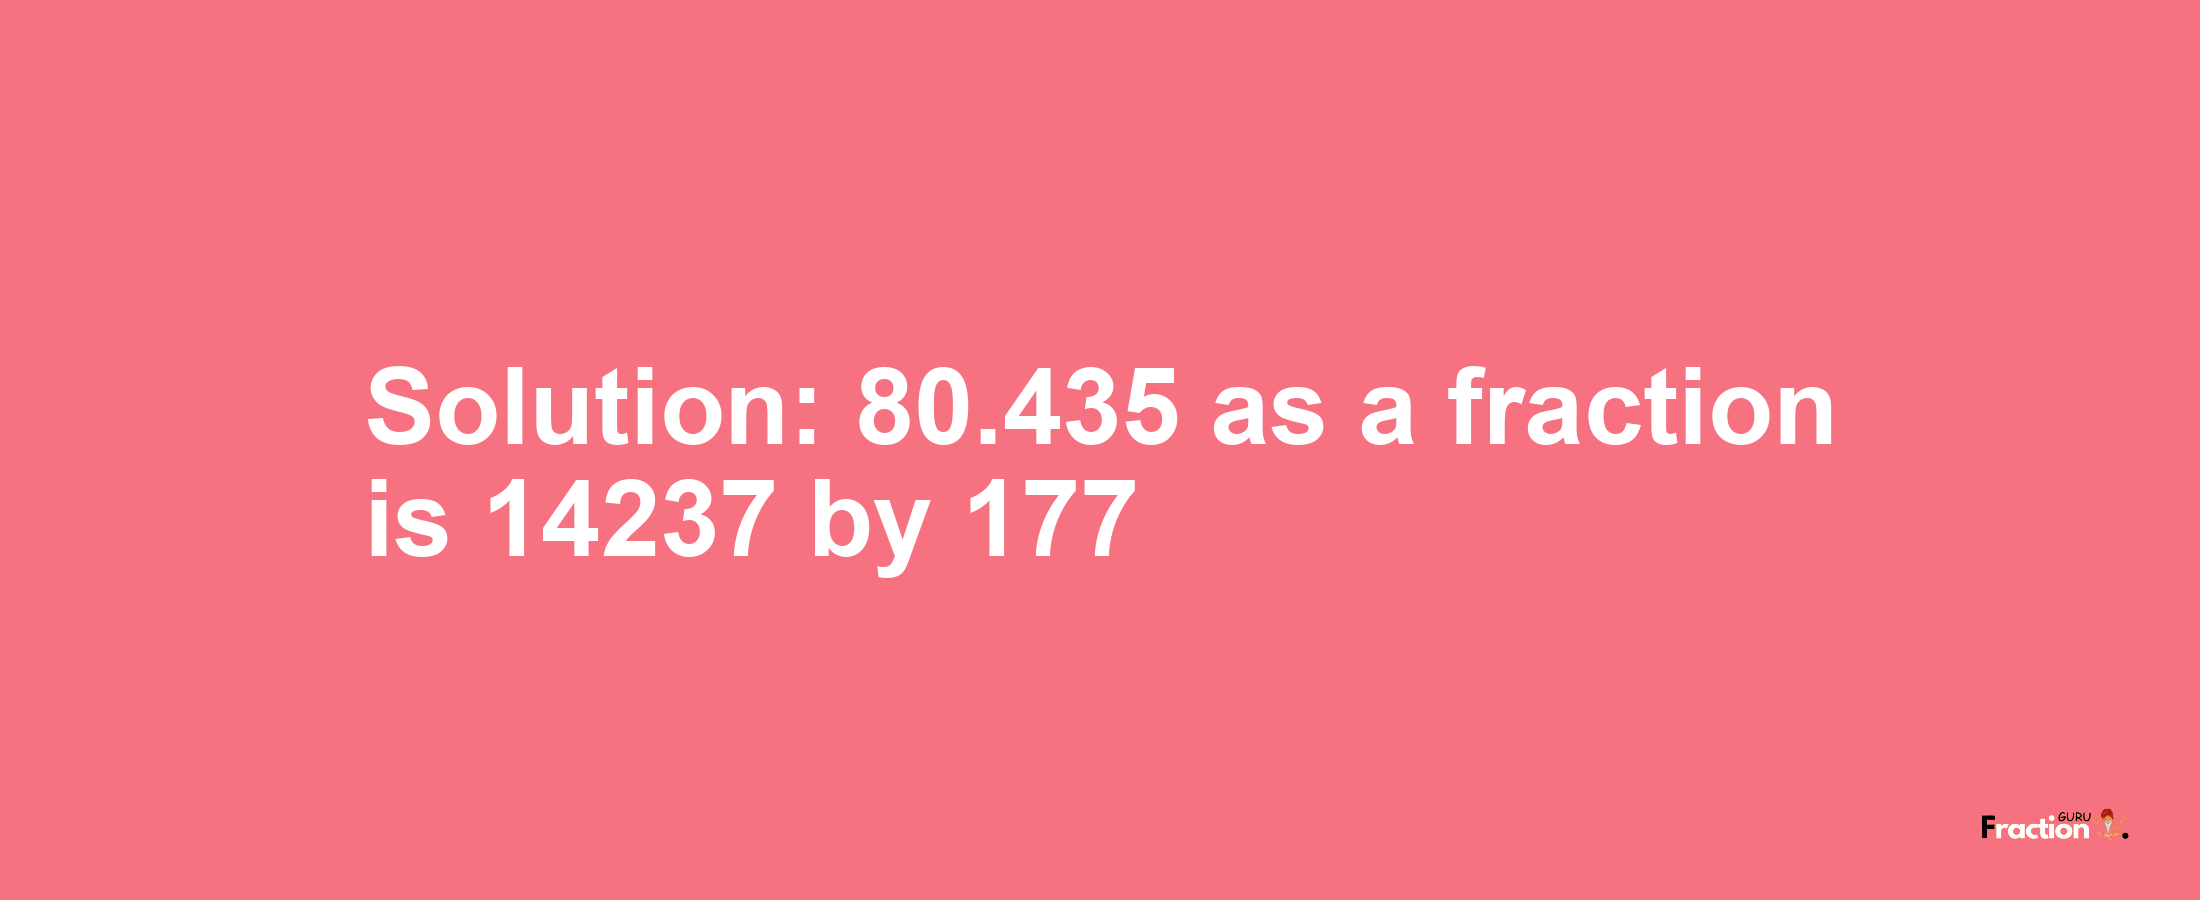 Solution:80.435 as a fraction is 14237/177